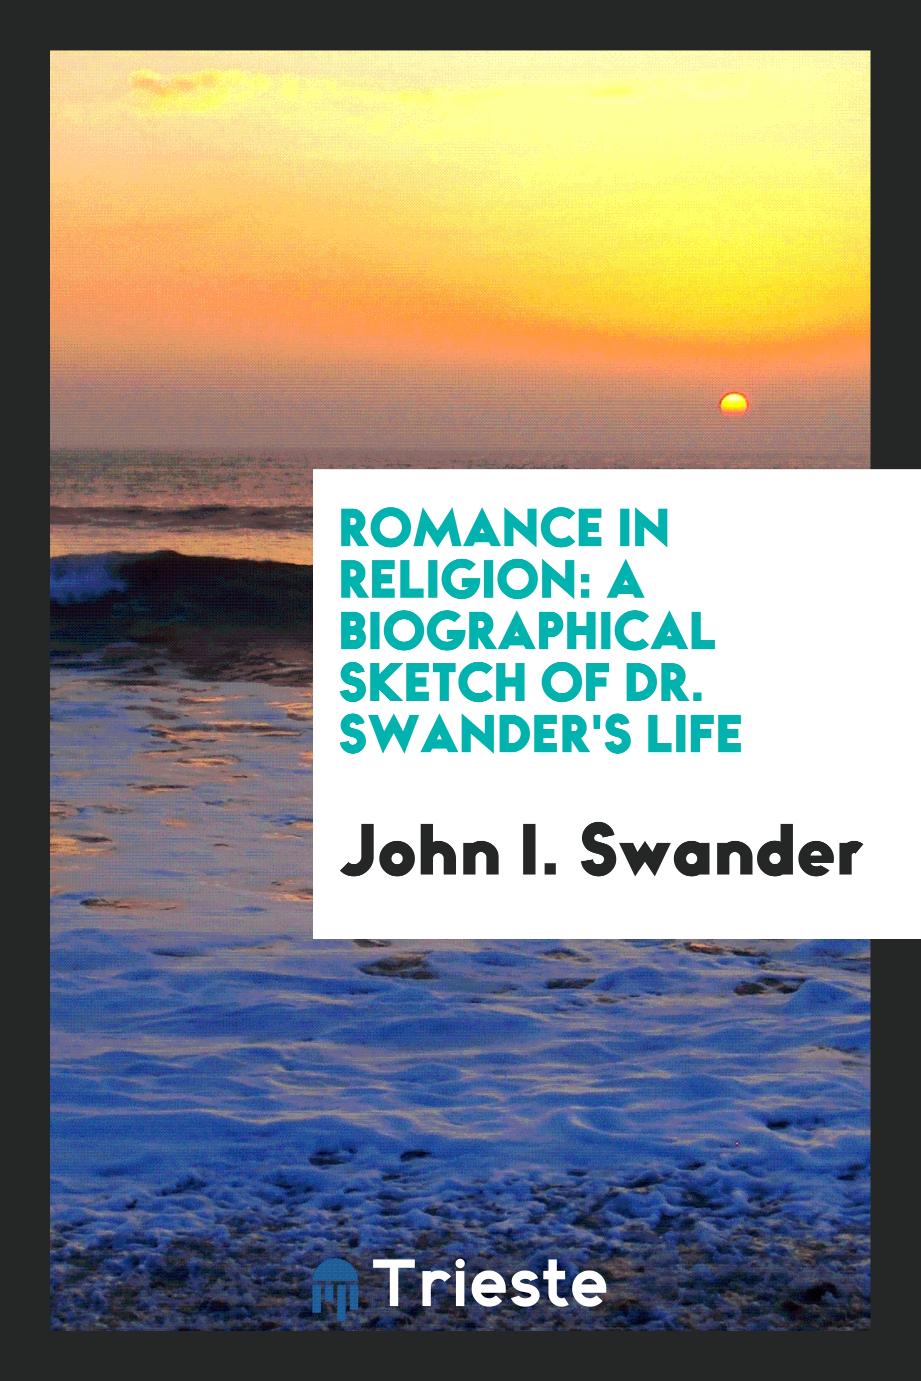 Romance in Religion: A Biographical Sketch of Dr. Swander's Life